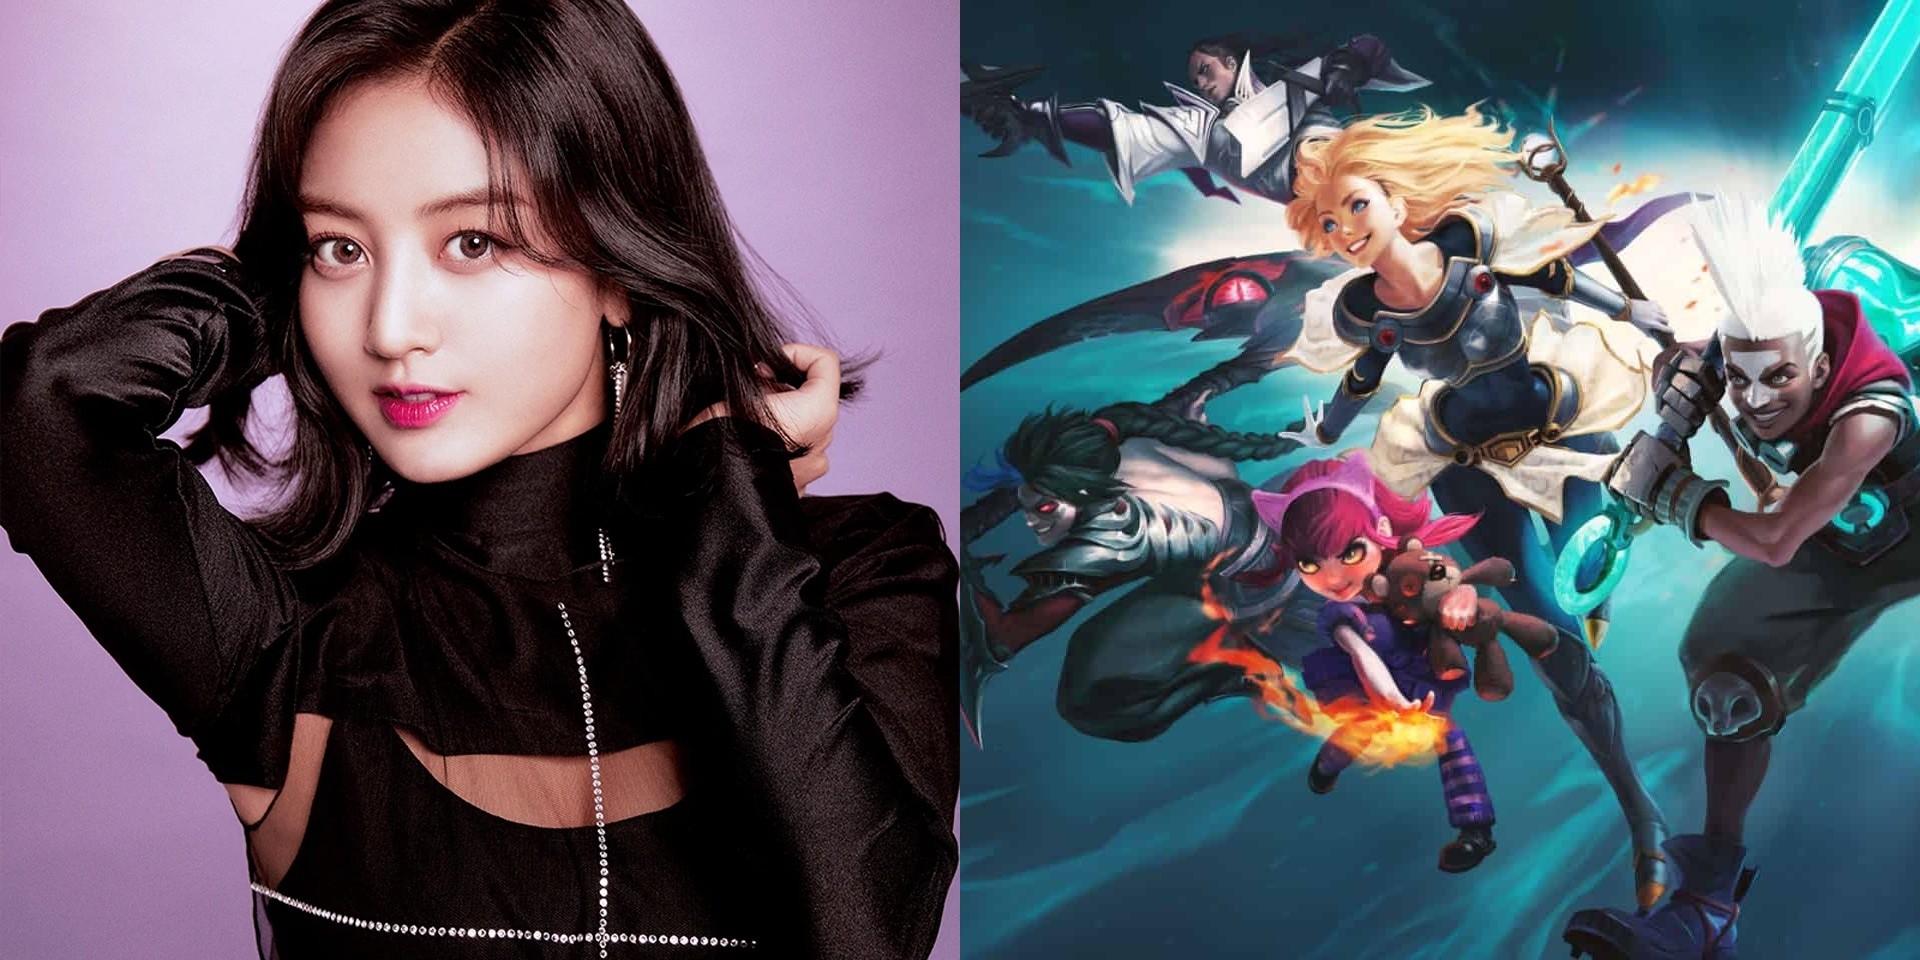 You just might get to play League of Legends with TWICE's Jihyo soon